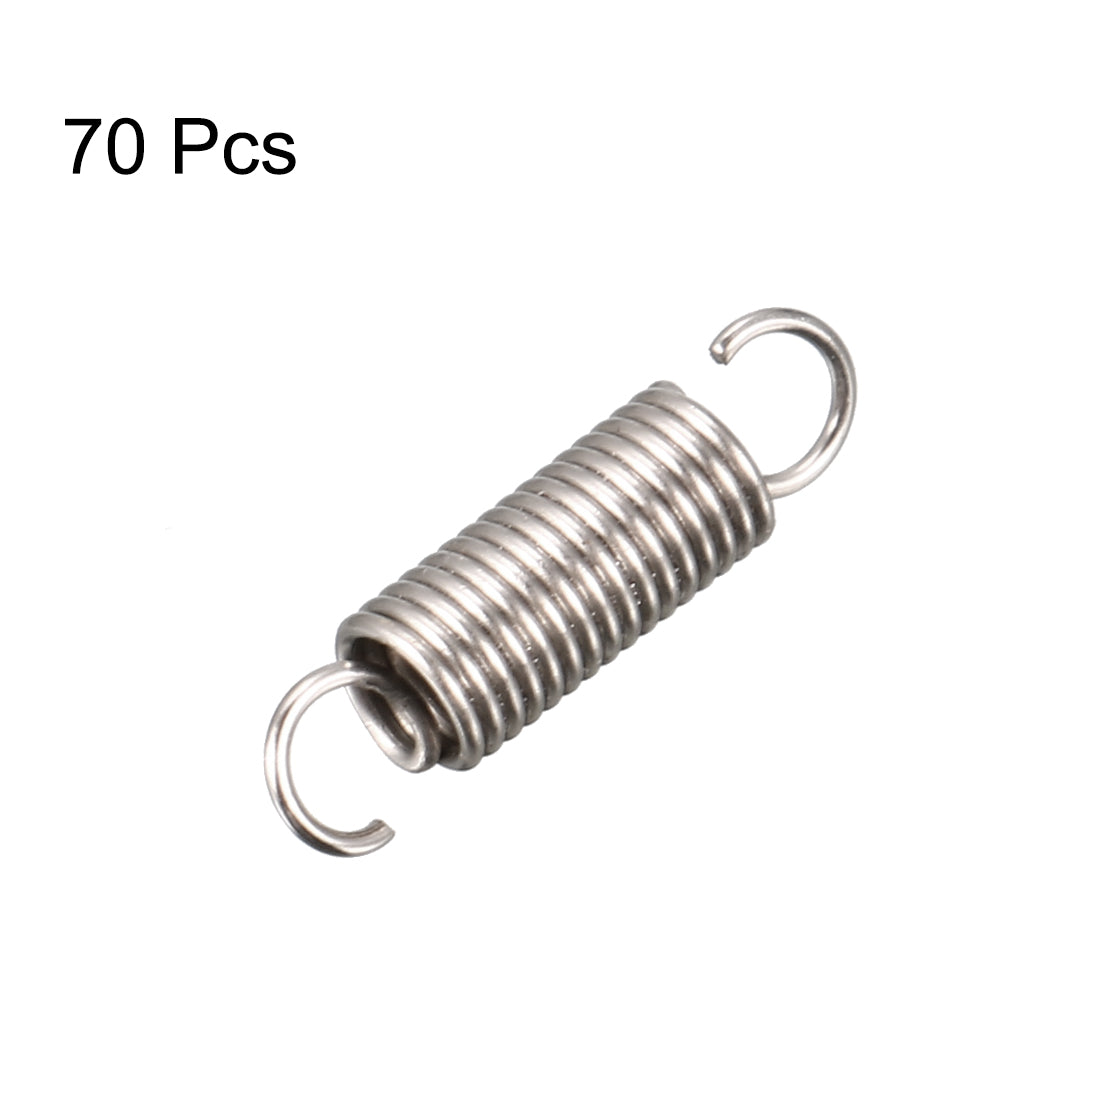 Uxcell Uxcell 0.4mm Wire Diax3mm ODx12mm Free Length Spring Steel Tension Spring 70pcs